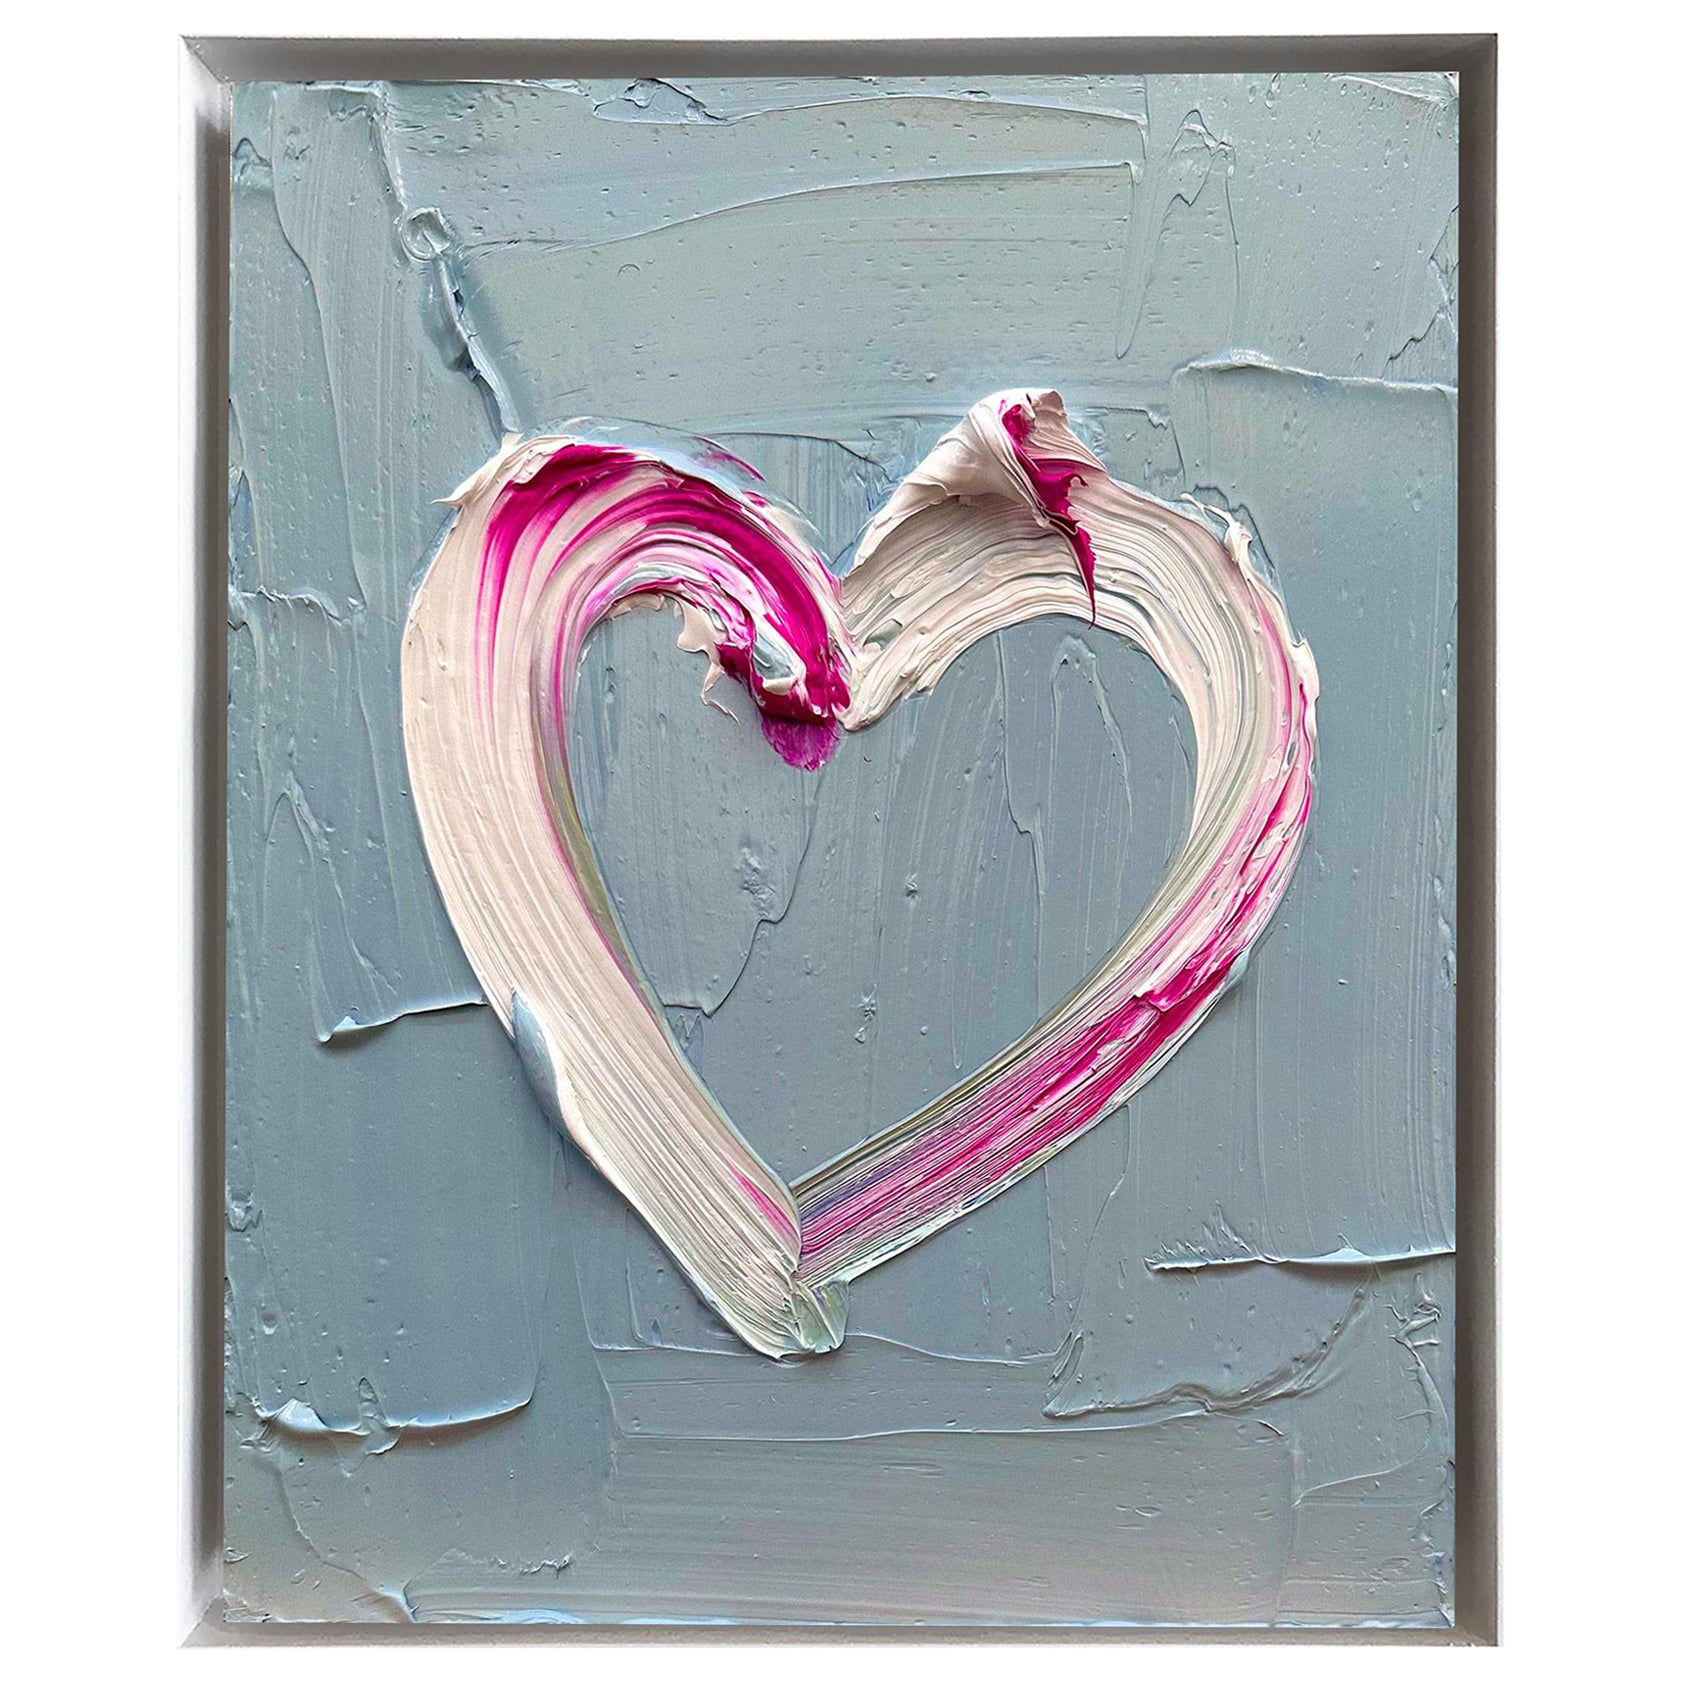 "My Hermès Heart" Contemporary Oil Painting on Wood White Floater Frame